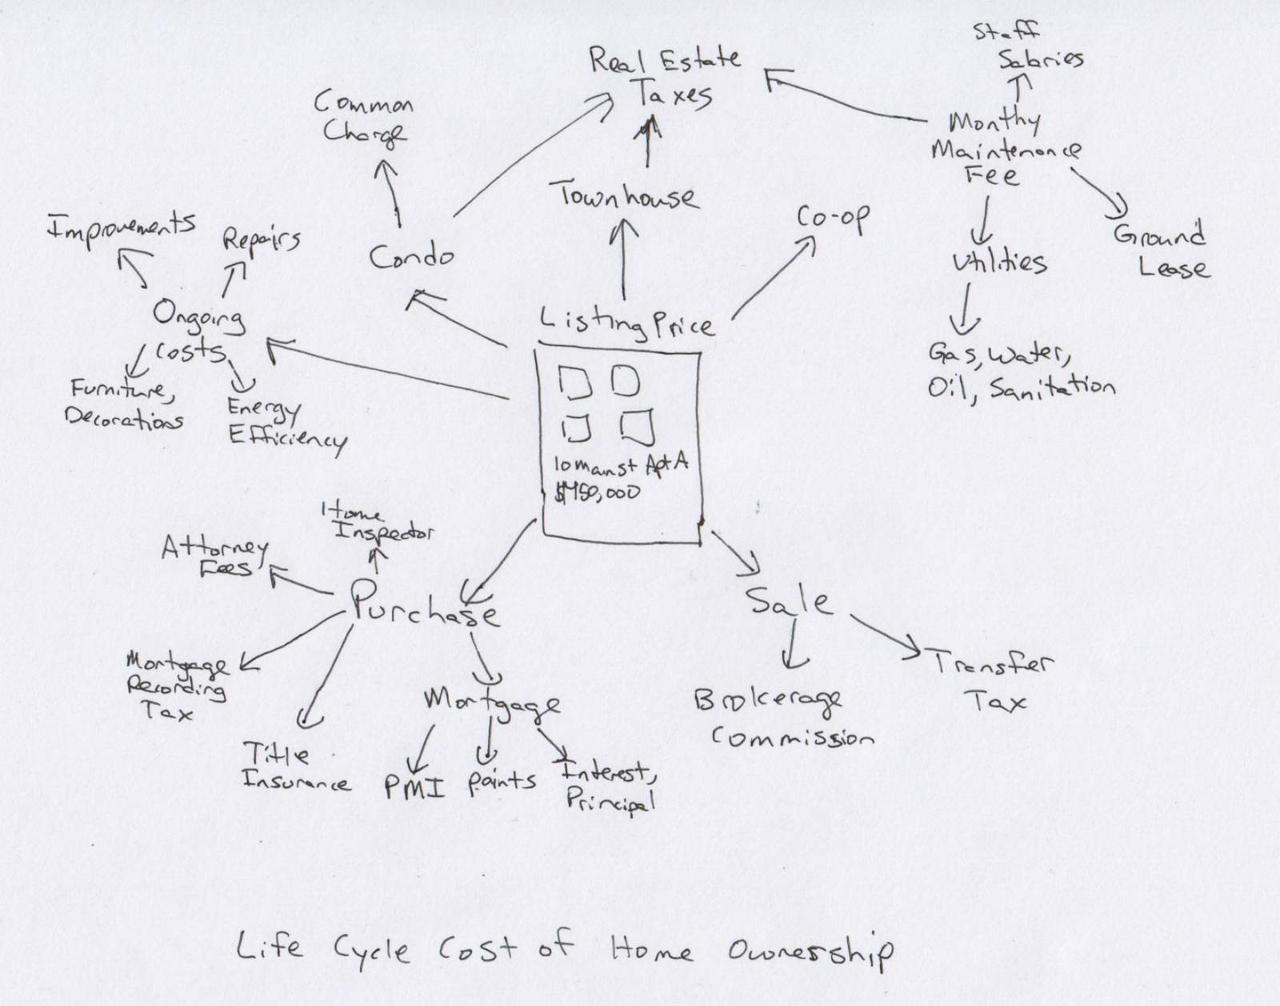 mind map with apartment listing in center, linking out to people or organizations involved in the home buying process.